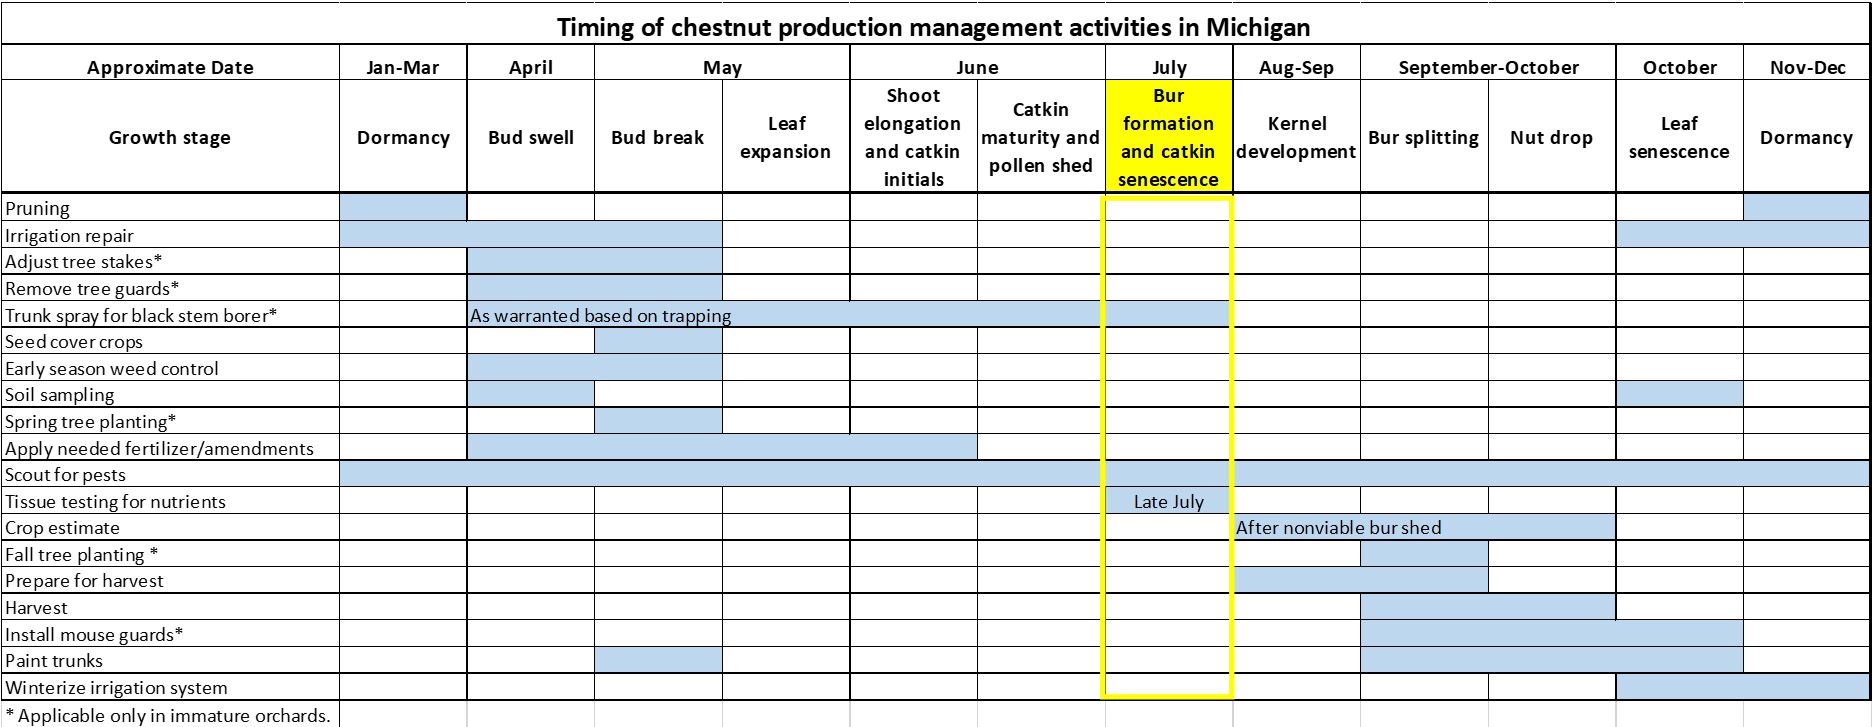 Timing of chestnut management activities